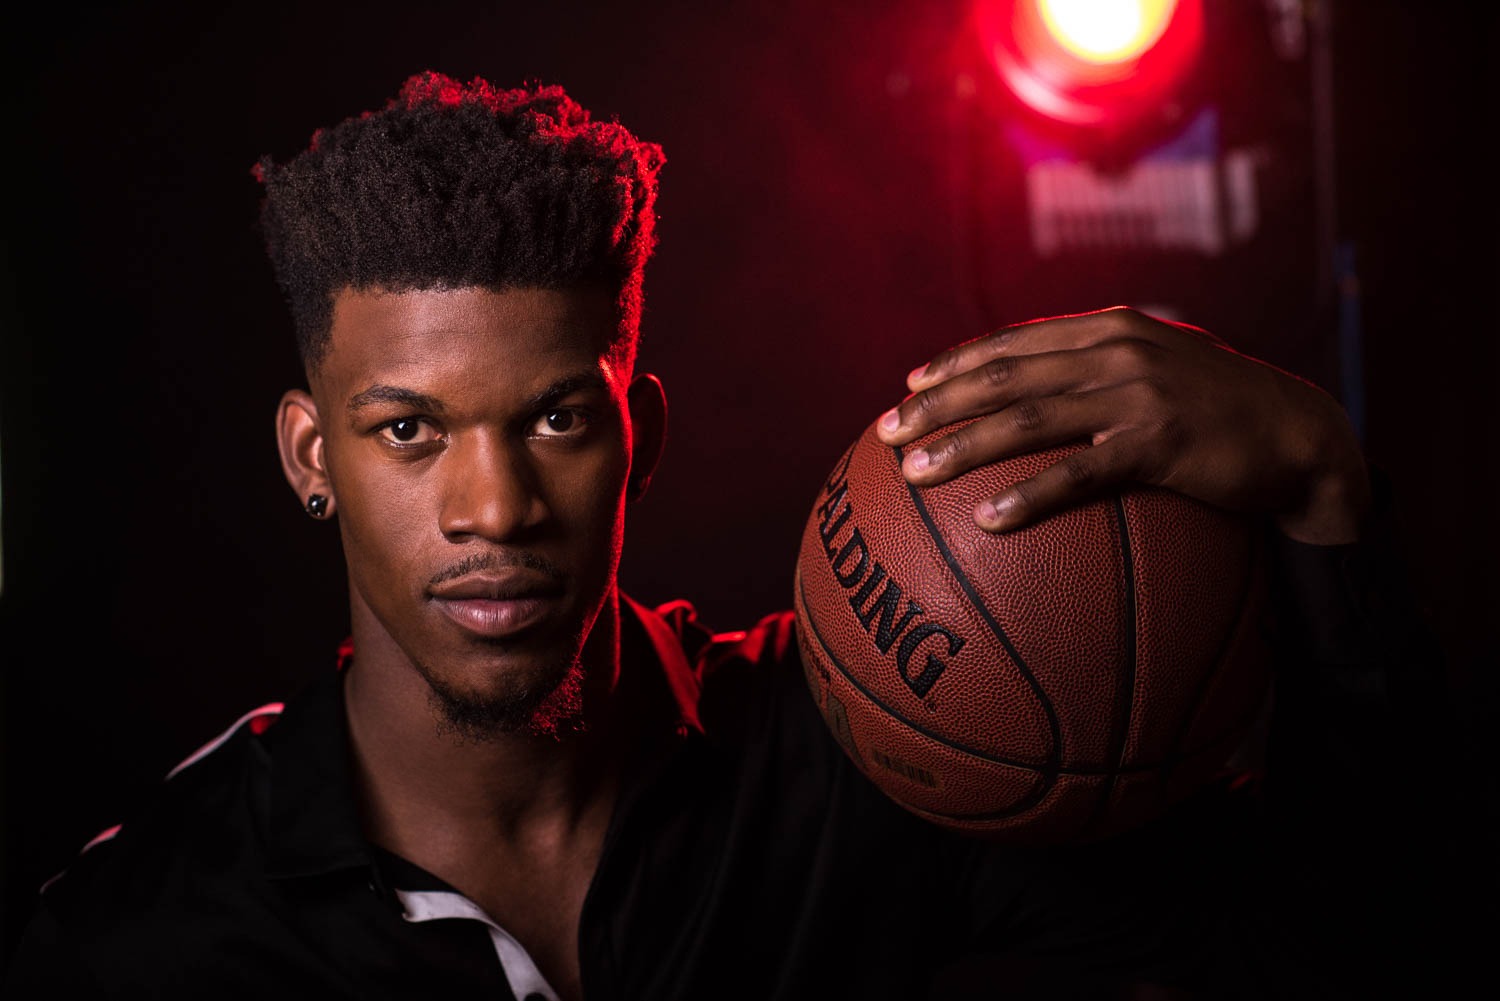 Jimmy Butler brings laughs to NBA's media day with new look